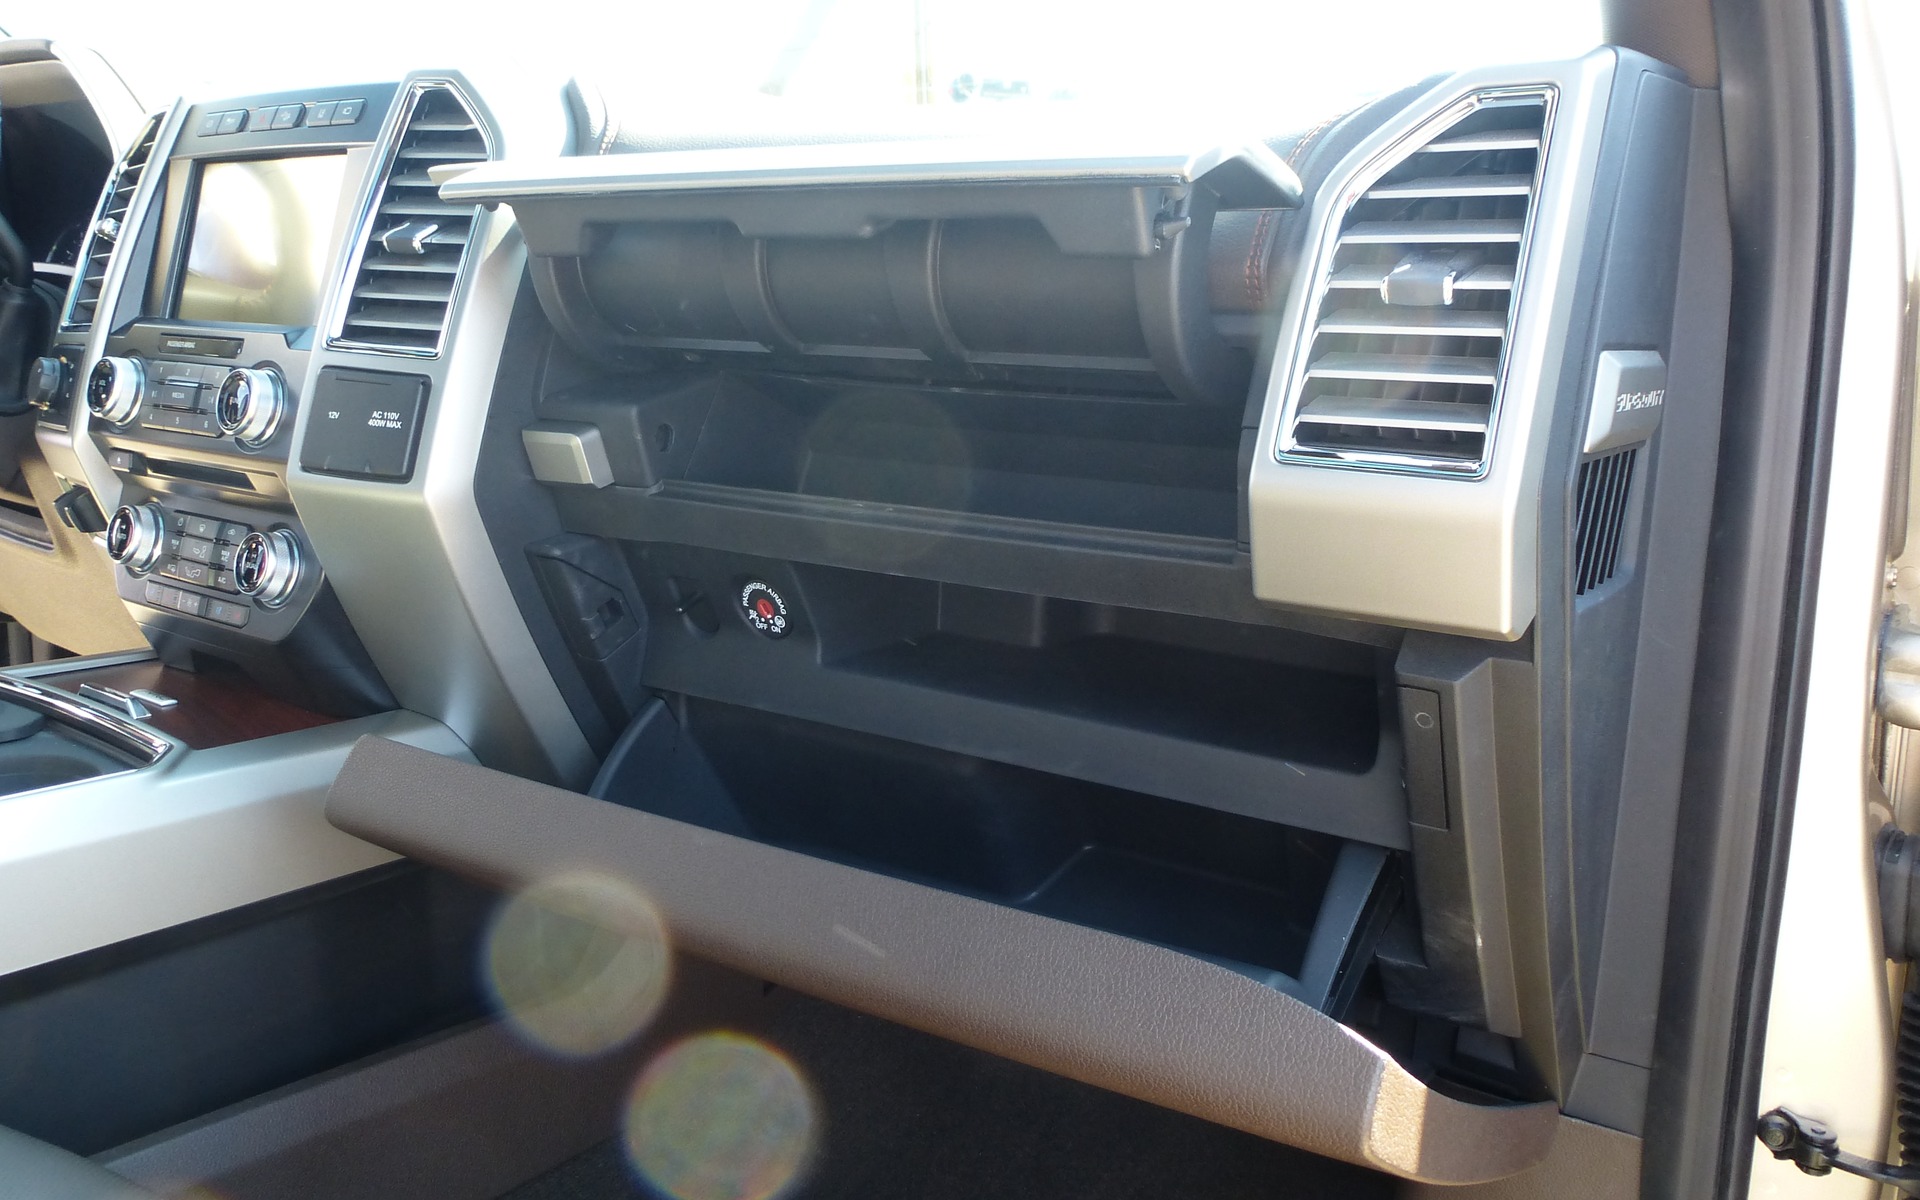 Double glove box with one locking compatment